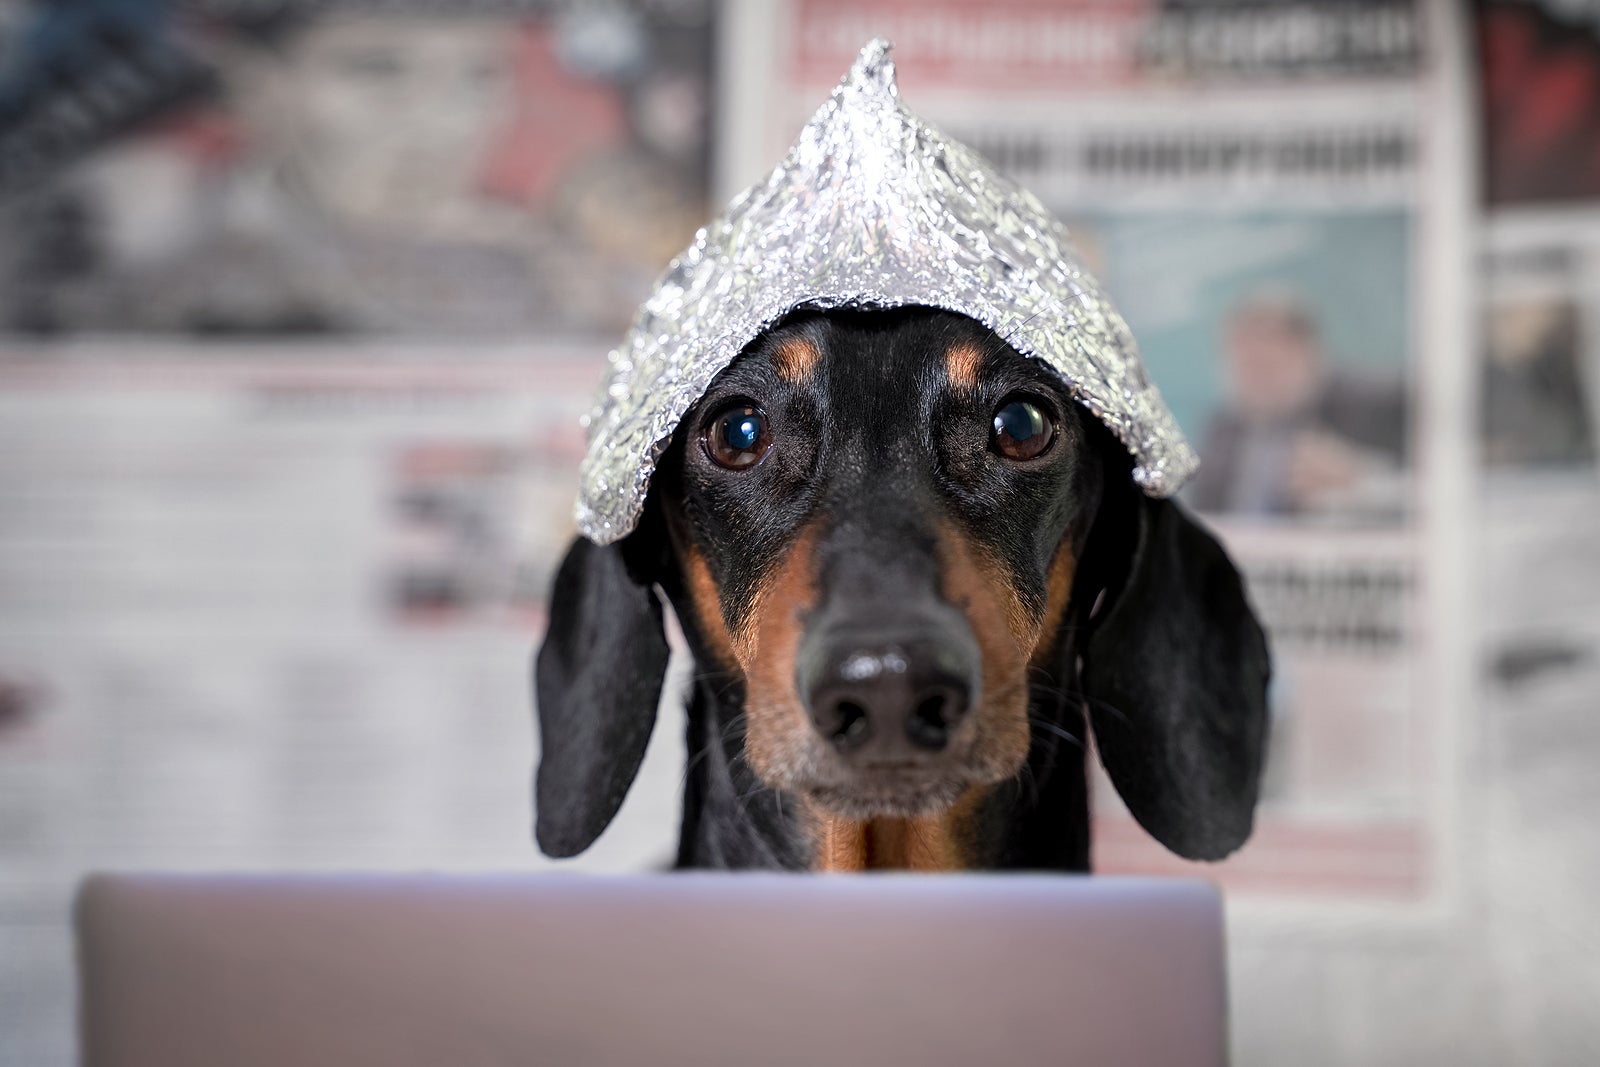 Suspicious dachshund dog in foil hat with laptop looking at camera, front view, blurry newspapers with conspiracy theories in background. Fear of aliens or radiation exposure from antennas and gadgets